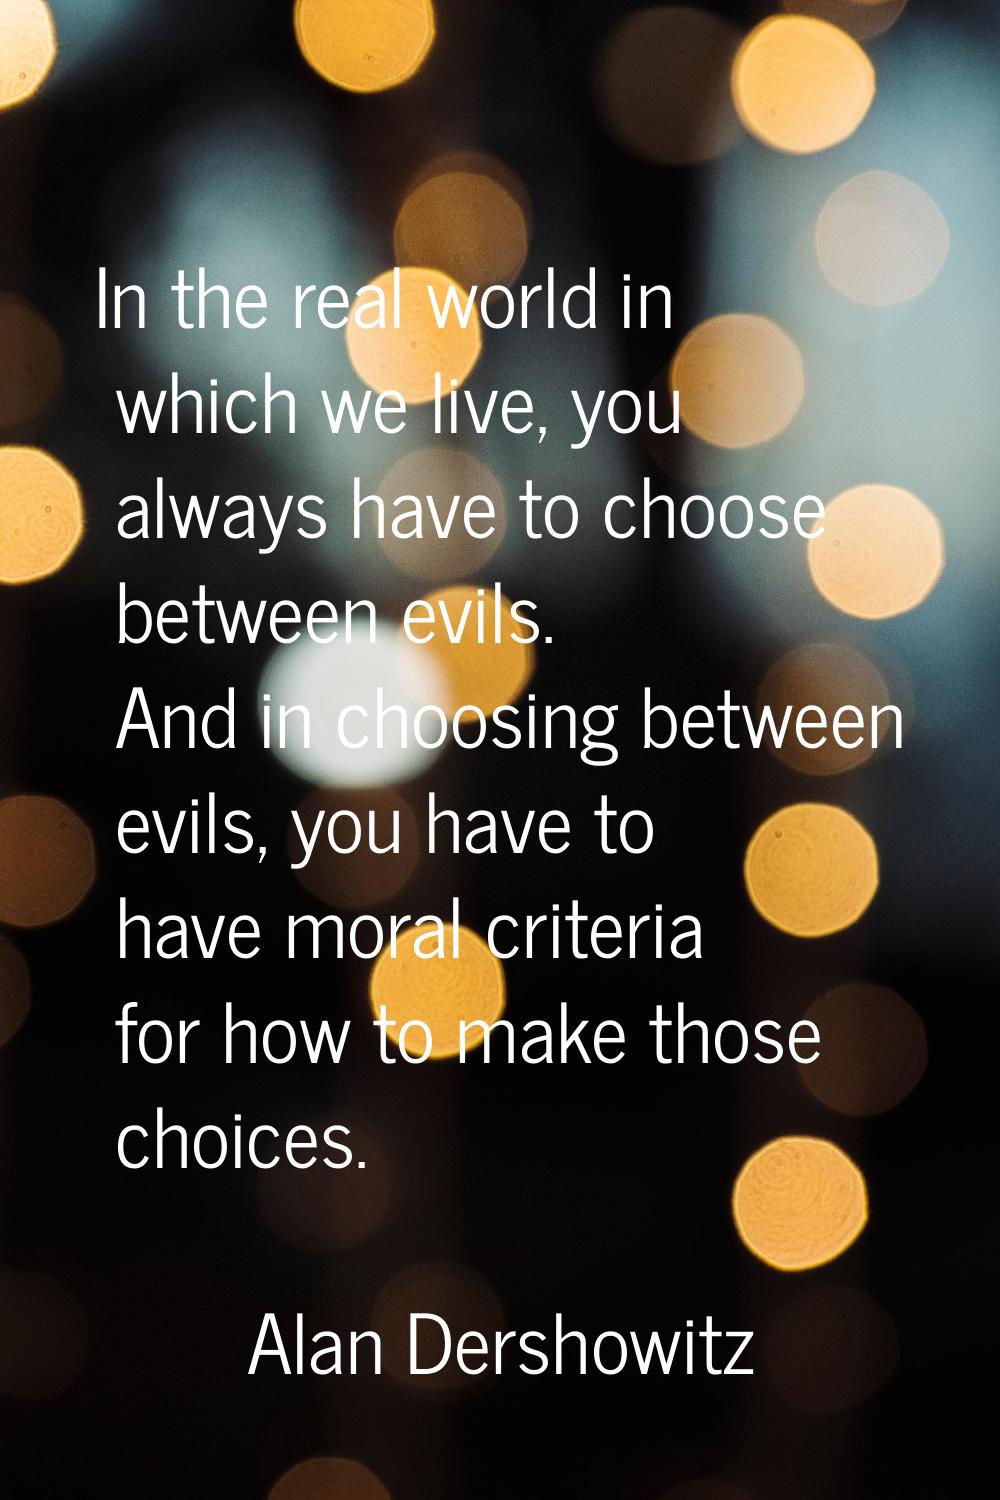 In the real world in which we live, you always have to choose between evils. And in choosing betwee